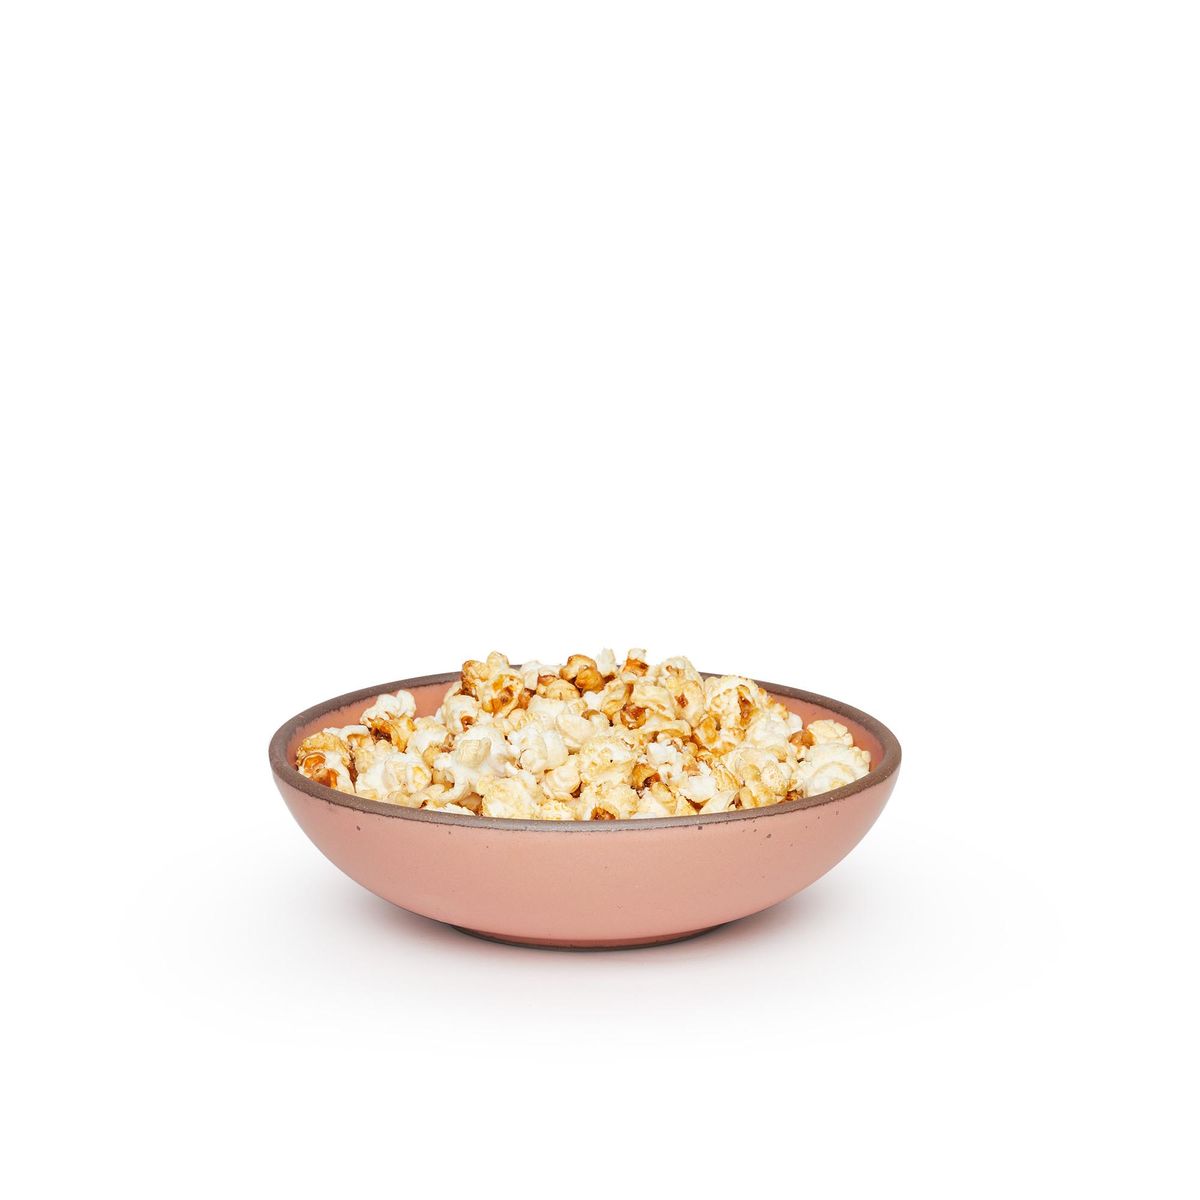 Everyday Bowl in Utah with Single Serving of Popcorn